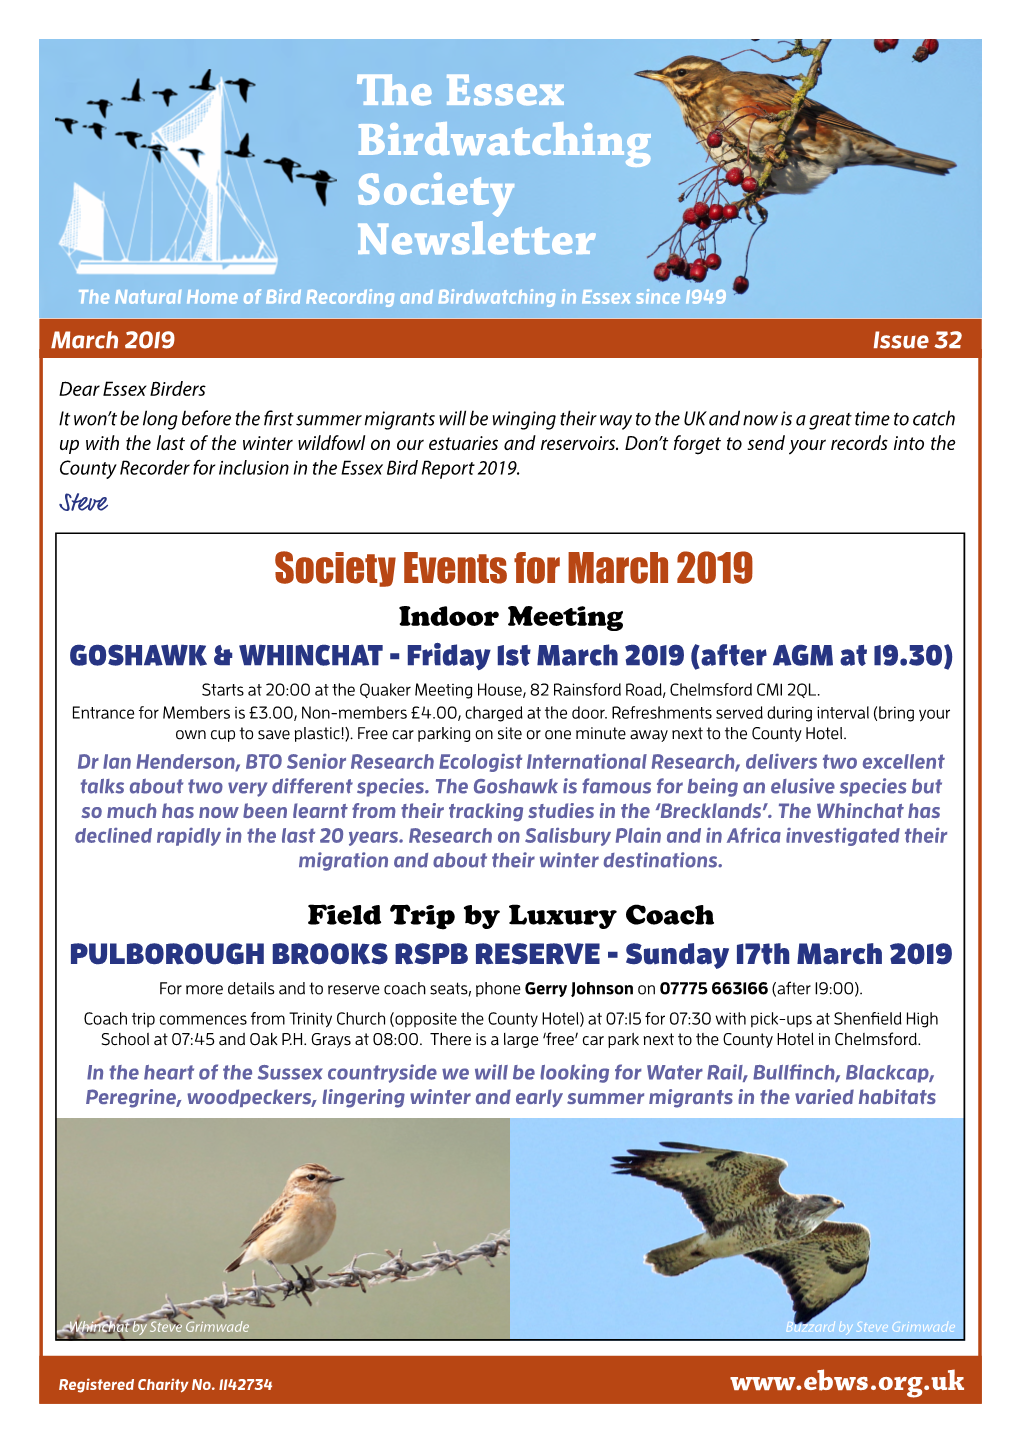 The Essex Birdwatching Society Newsletter the Natural Home of Bird Recording and Birdwatching in Essex Since 1949 March 2019 Issue 32